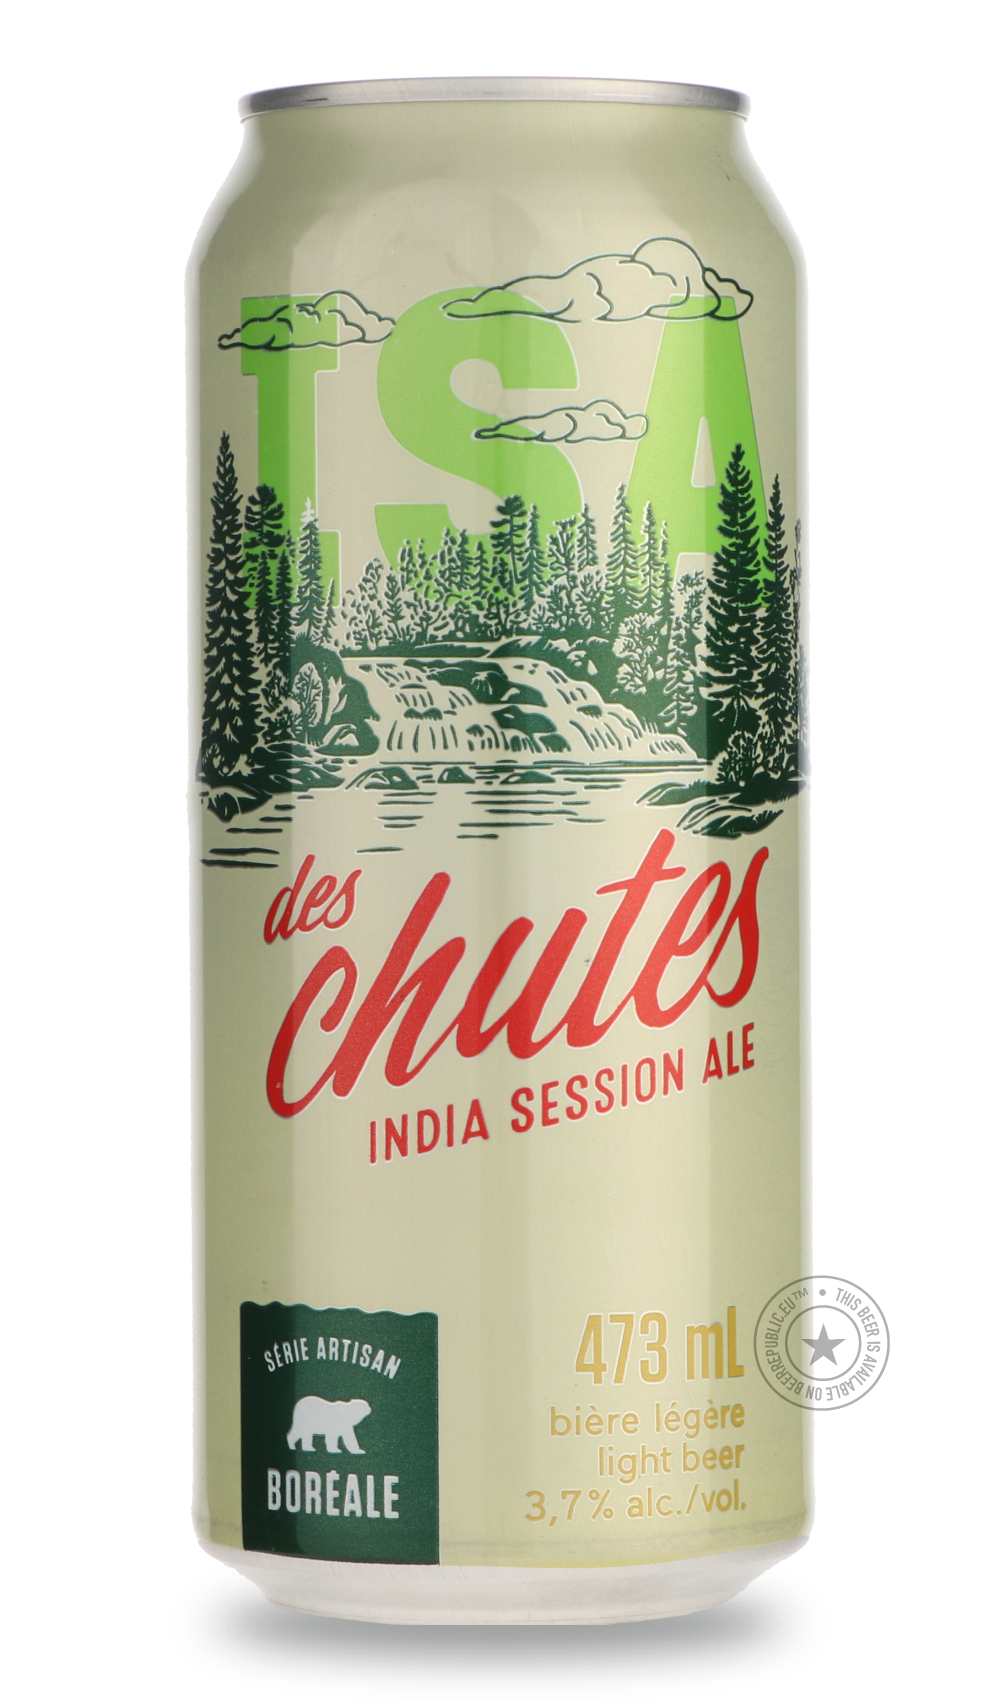 -Boréale- ISA Des Chutes-IPA- Only @ Beer Republic - The best online beer store for American & Canadian craft beer - Buy beer online from the USA and Canada - Bier online kopen - Amerikaans bier kopen - Craft beer store - Craft beer kopen - Amerikanisch bier kaufen - Bier online kaufen - Acheter biere online - IPA - Stout - Porter - New England IPA - Hazy IPA - Imperial Stout - Barrel Aged - Barrel Aged Imperial Stout - Brown - Dark beer - Blond - Blonde - Pilsner - Lager - Wheat - Weizen - Amber - Barley W